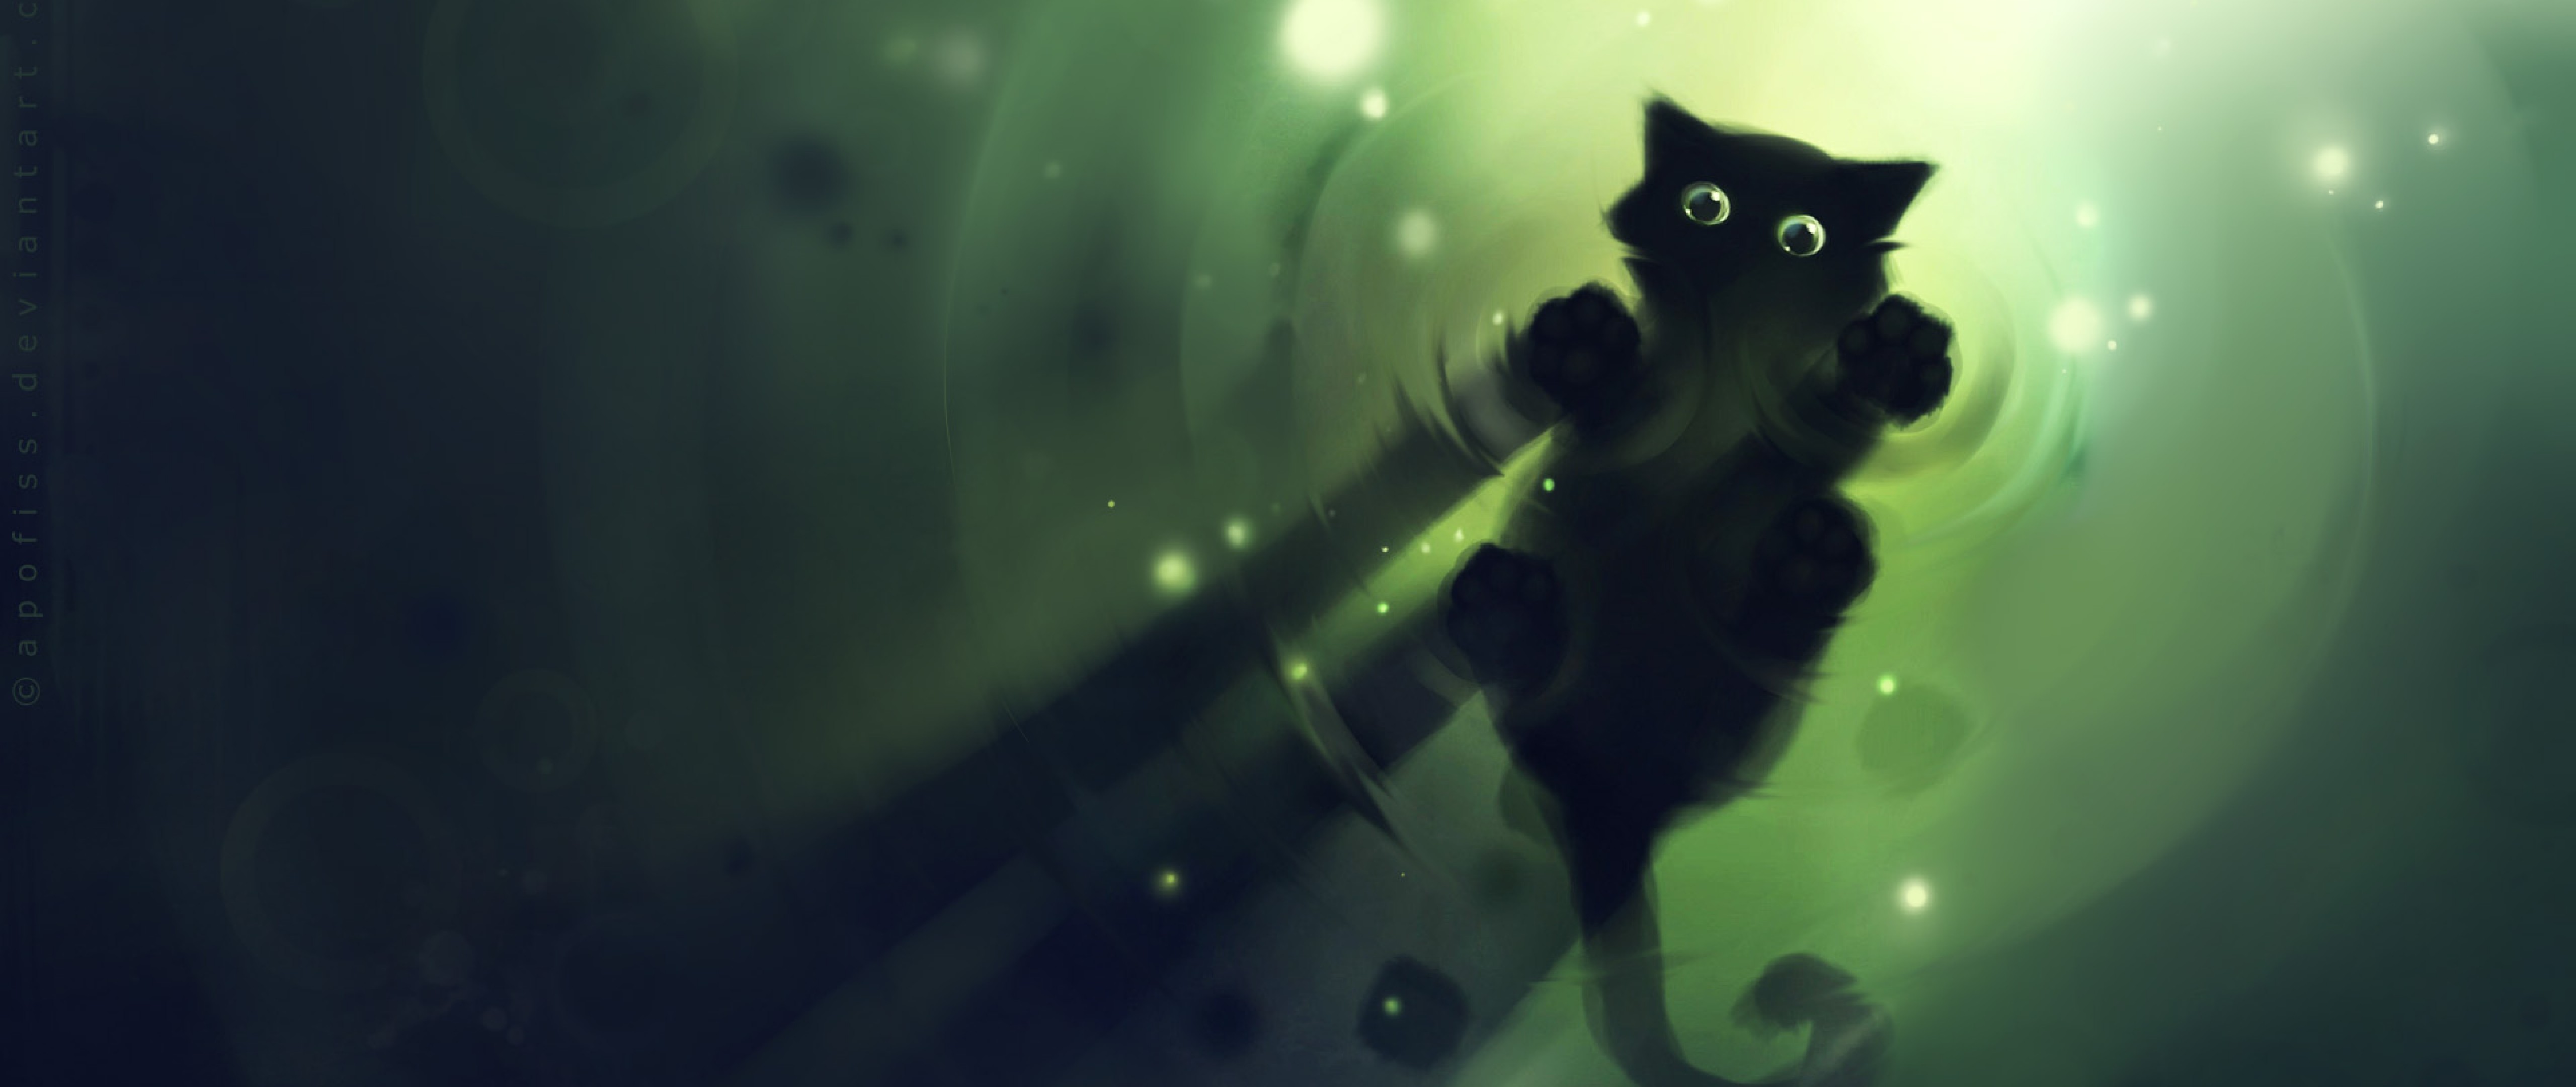 Cute Animated Cat Cartoon Background Wallpaper for Desktop and Mobiles